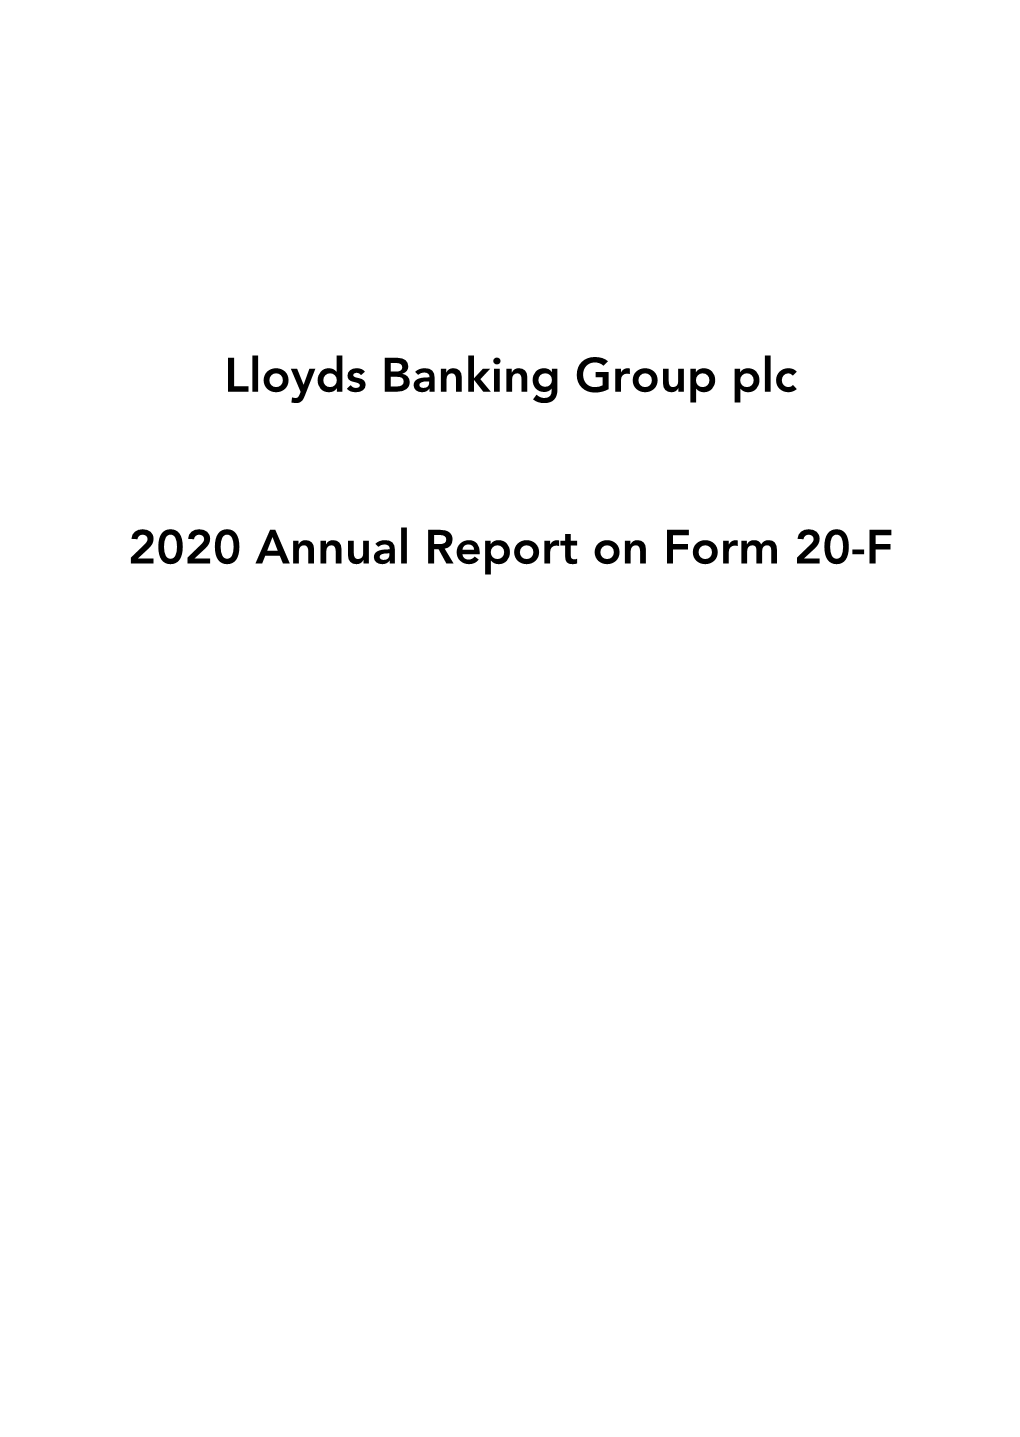 Lloyds Banking Group Plc 2020 Annual Report on Form 20-F